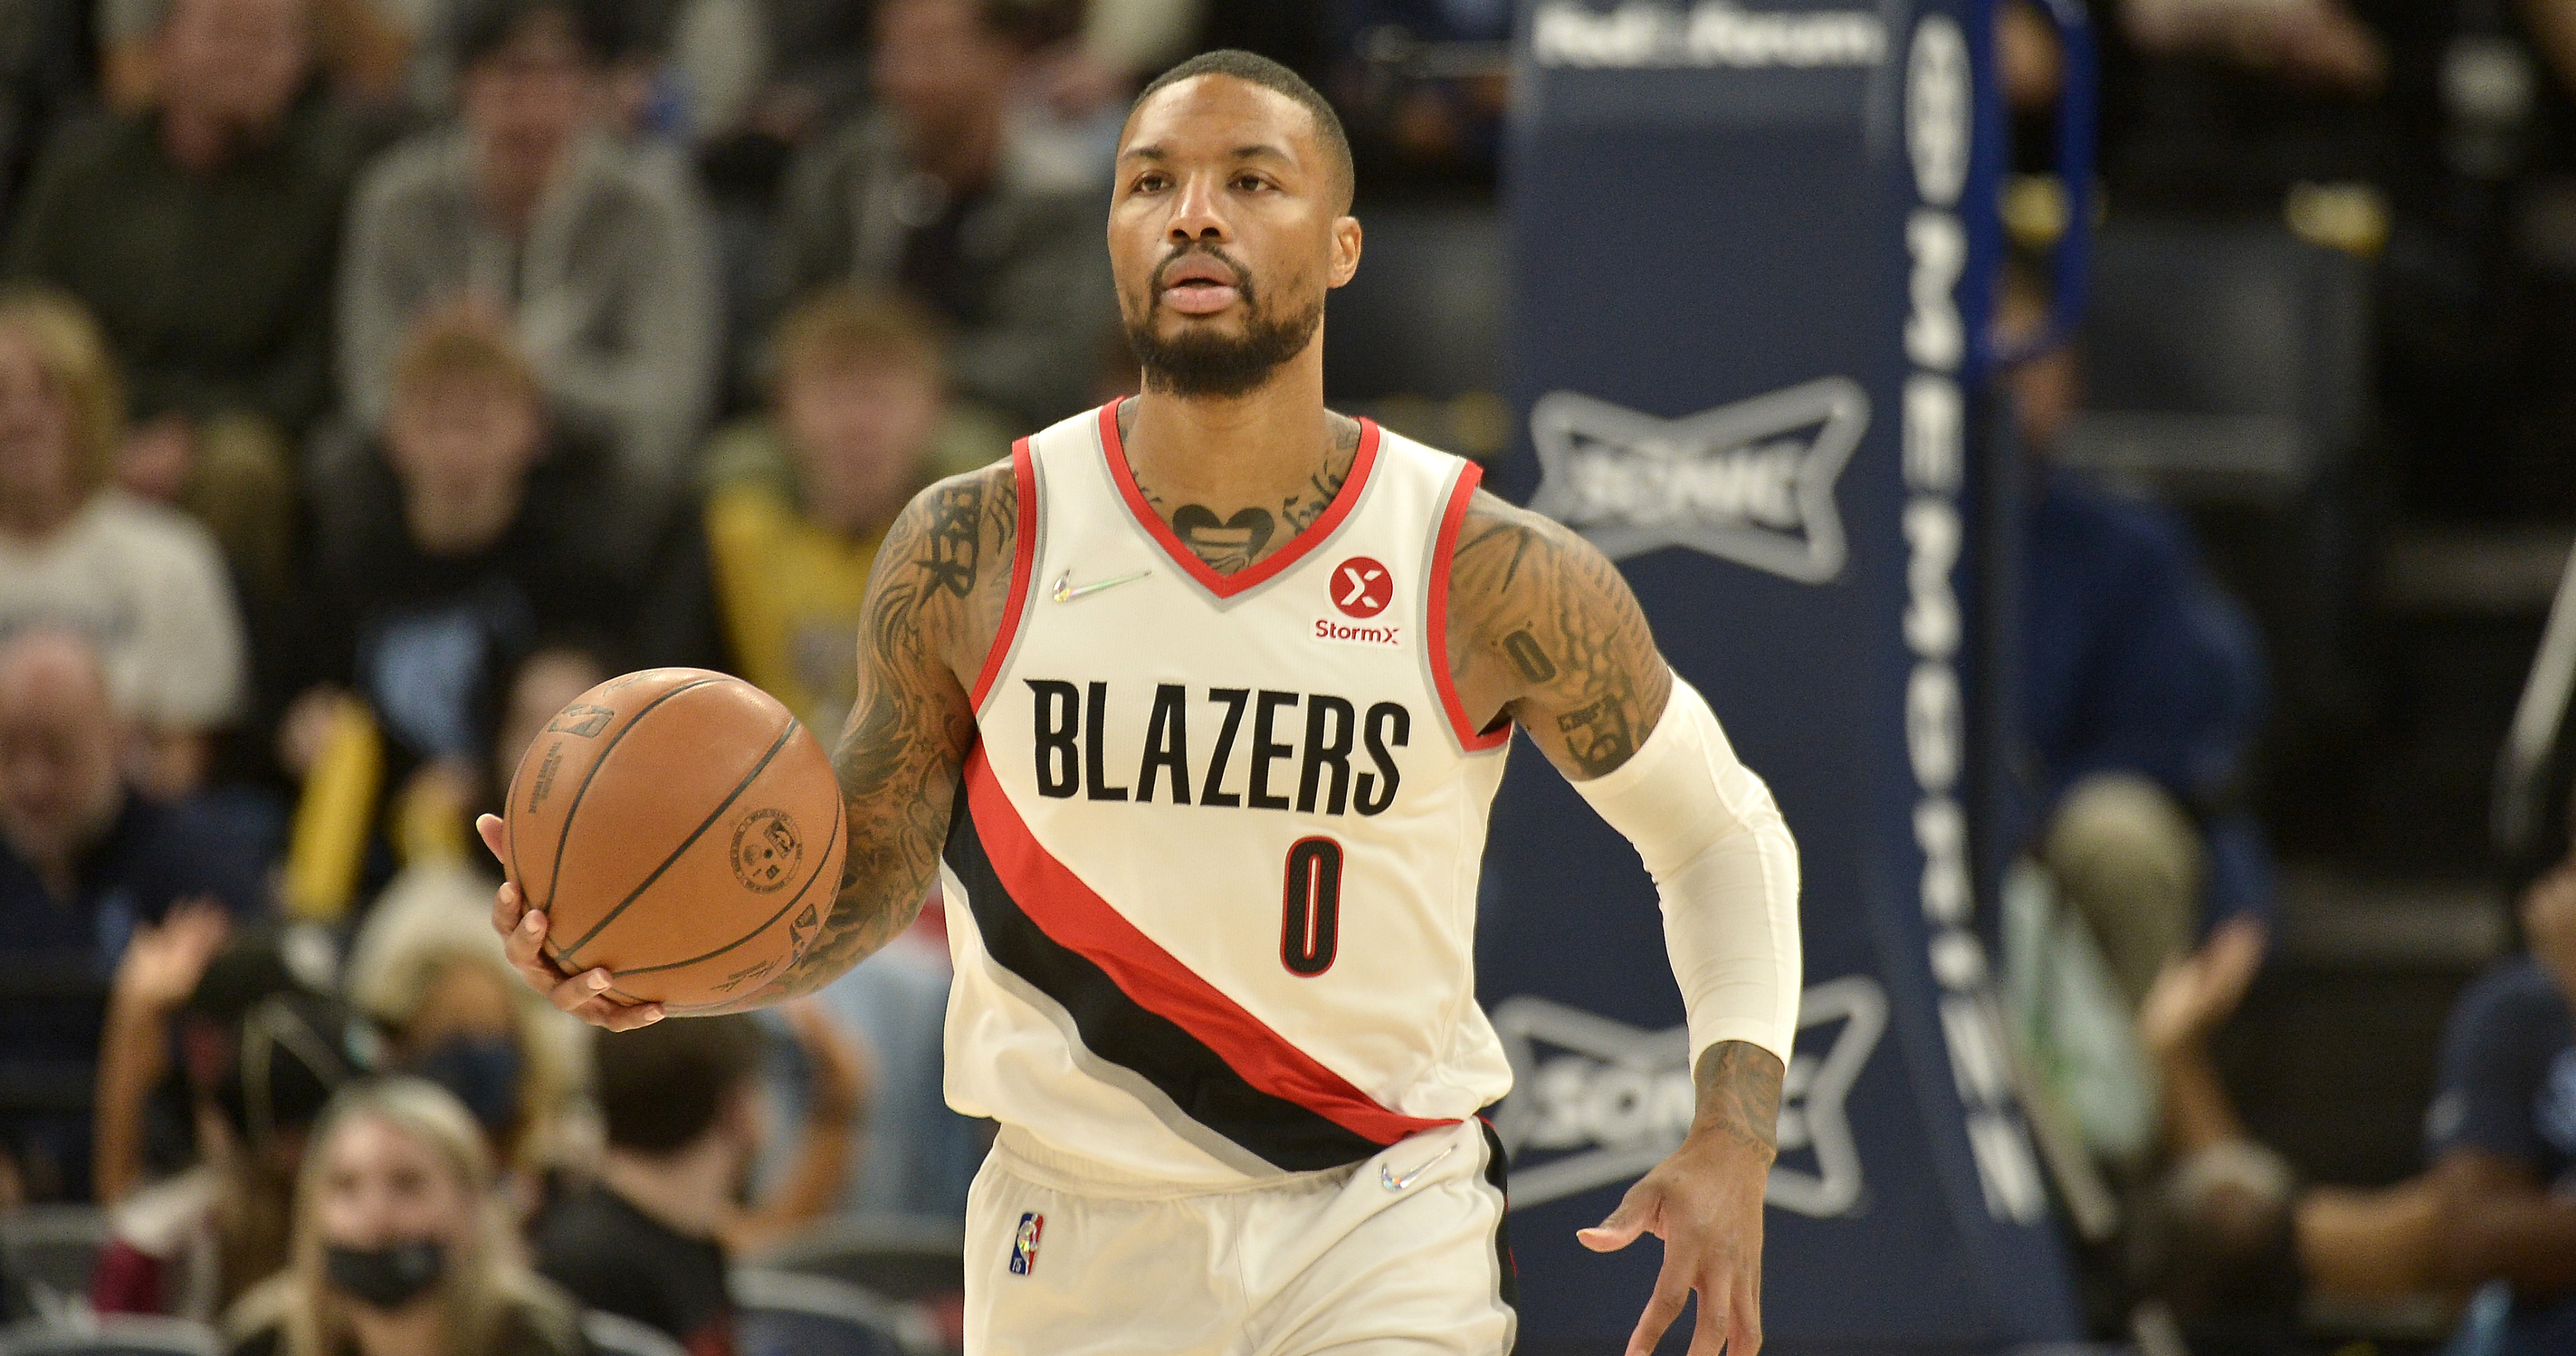 Gary Payton supports Damian Lillard's trade request to the Miami